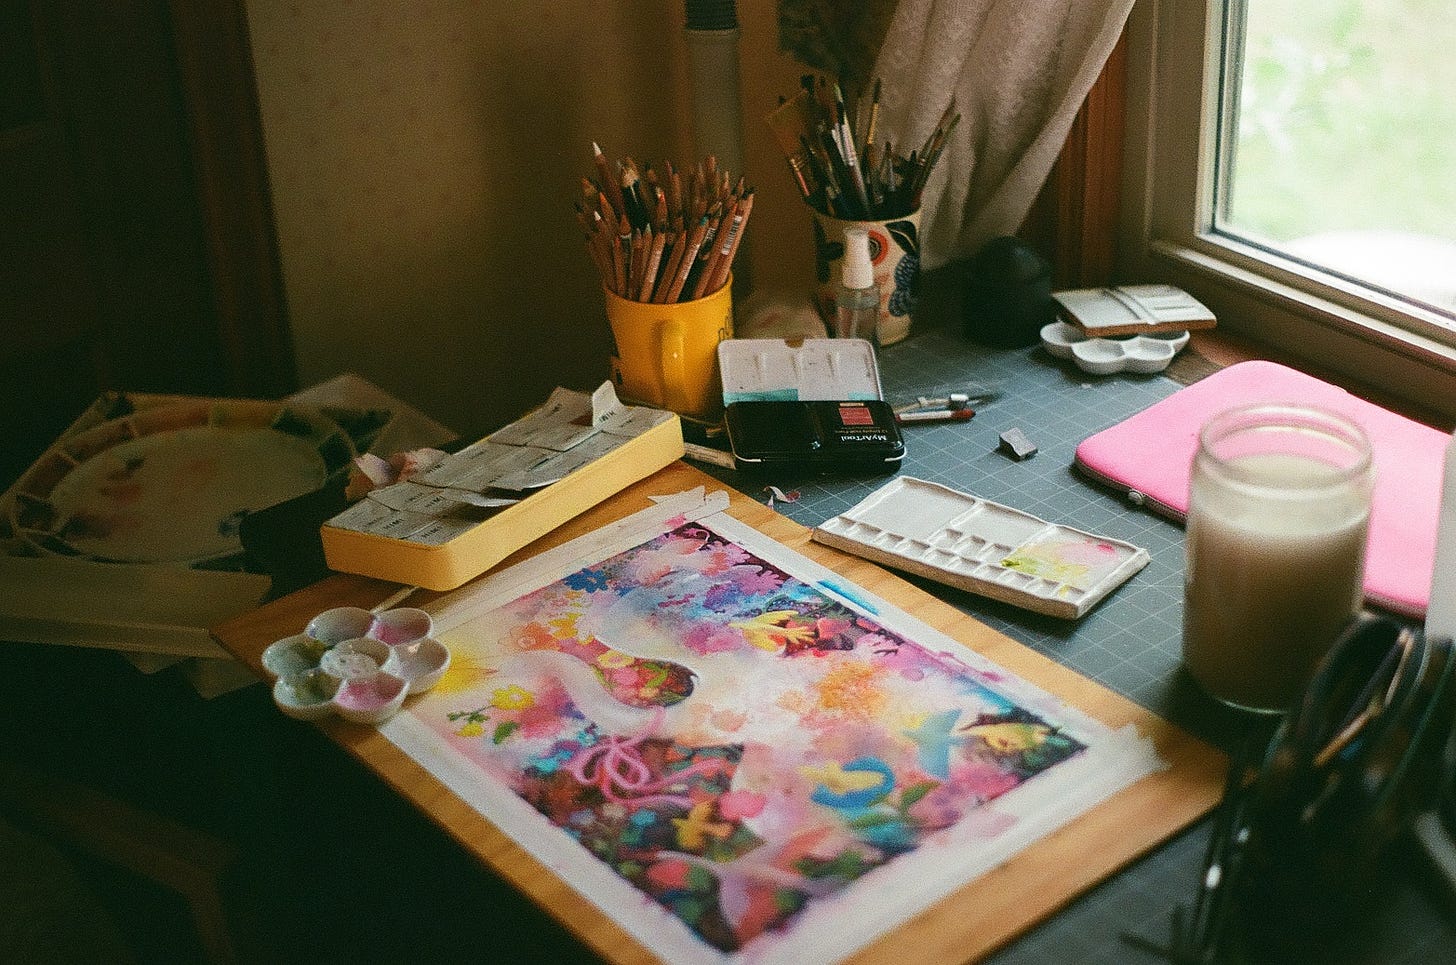 Film photo of the illustrator's studio desk. A work in progress illustration is surrounded by art supplies, including watercolor, gouache, pencils, pens, brushes, and more.